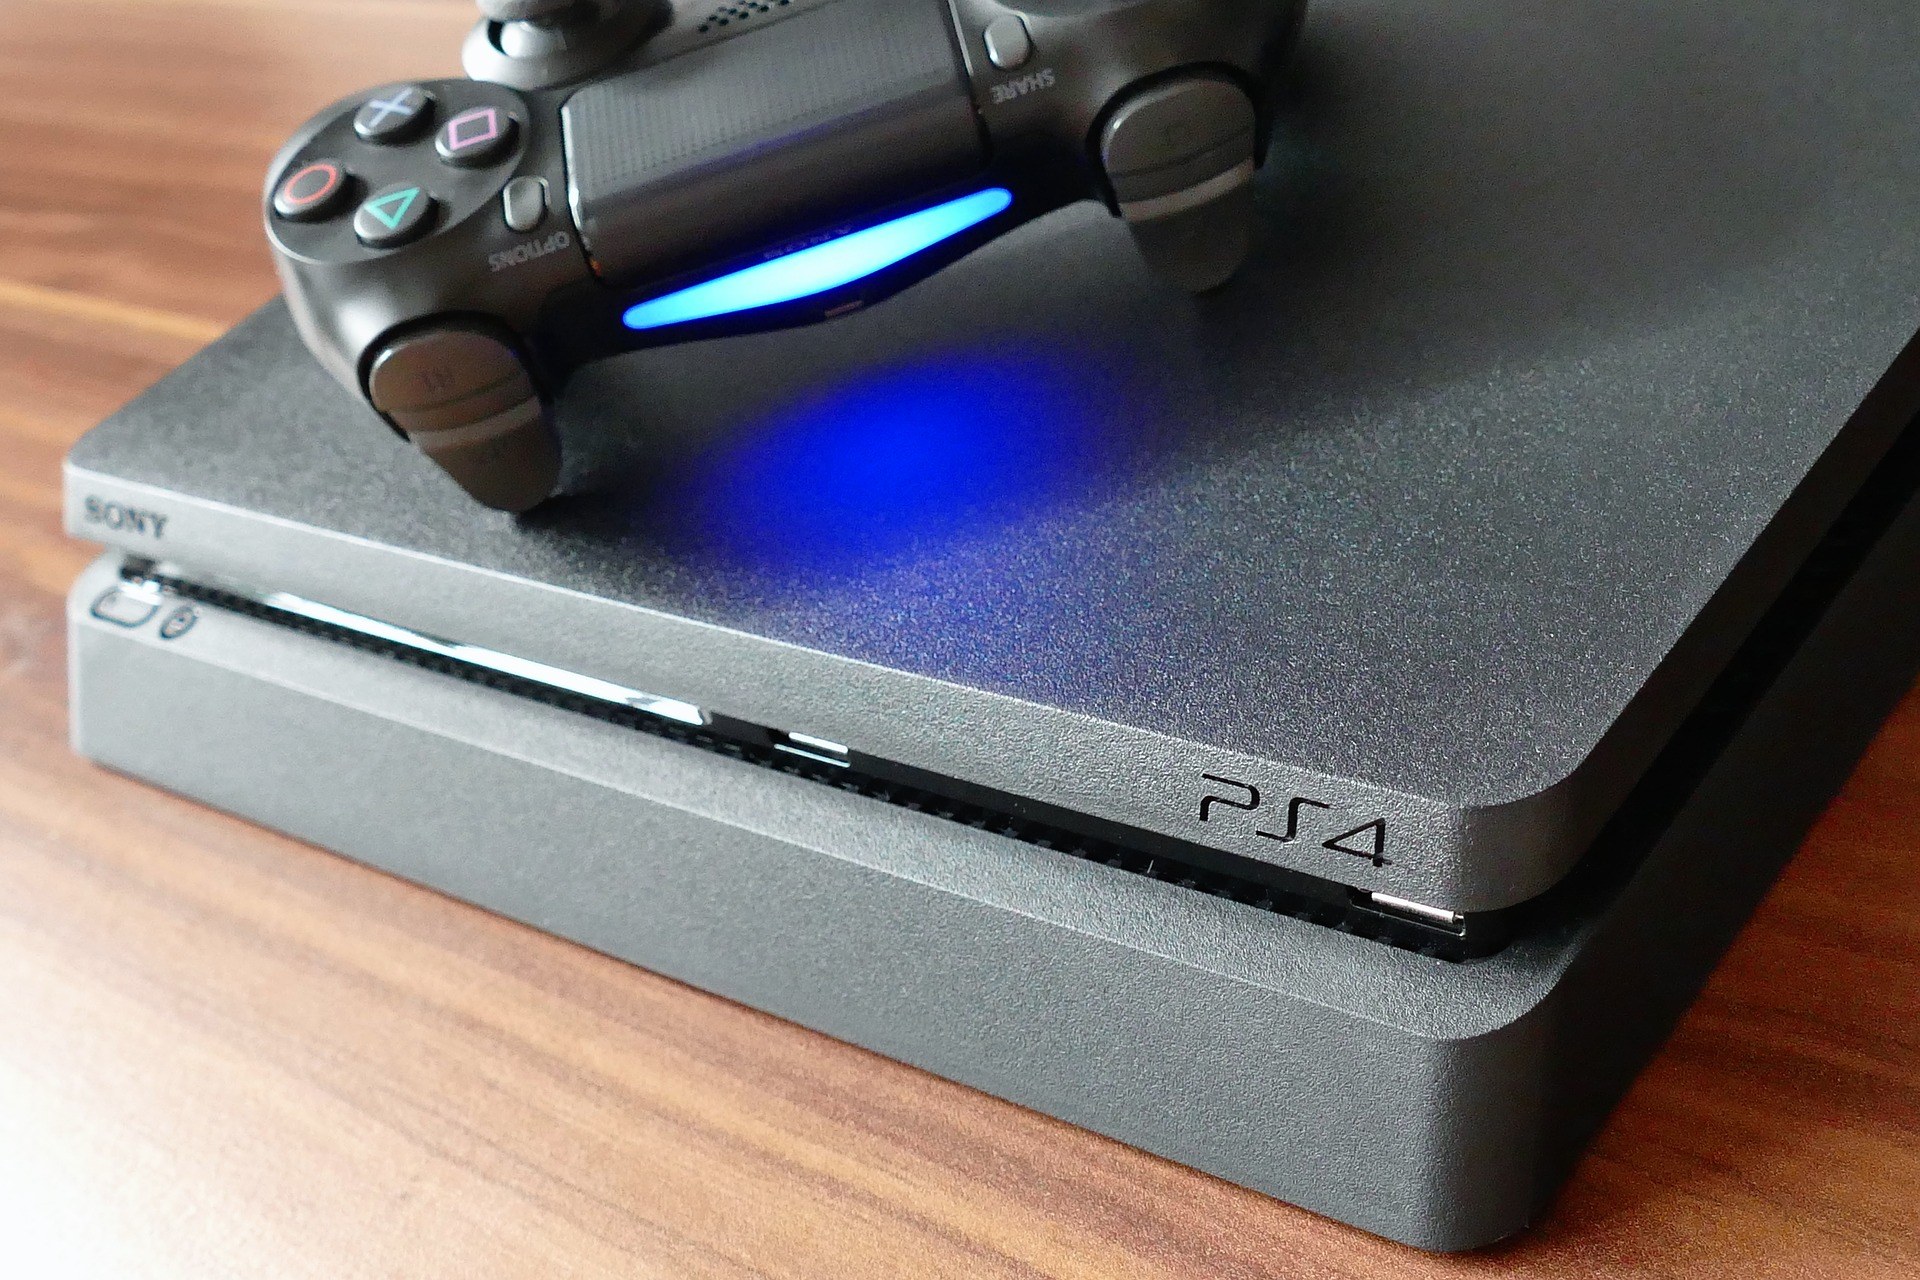 Sony's new PS4 Pro quietly fixes its noise problems - The Verge